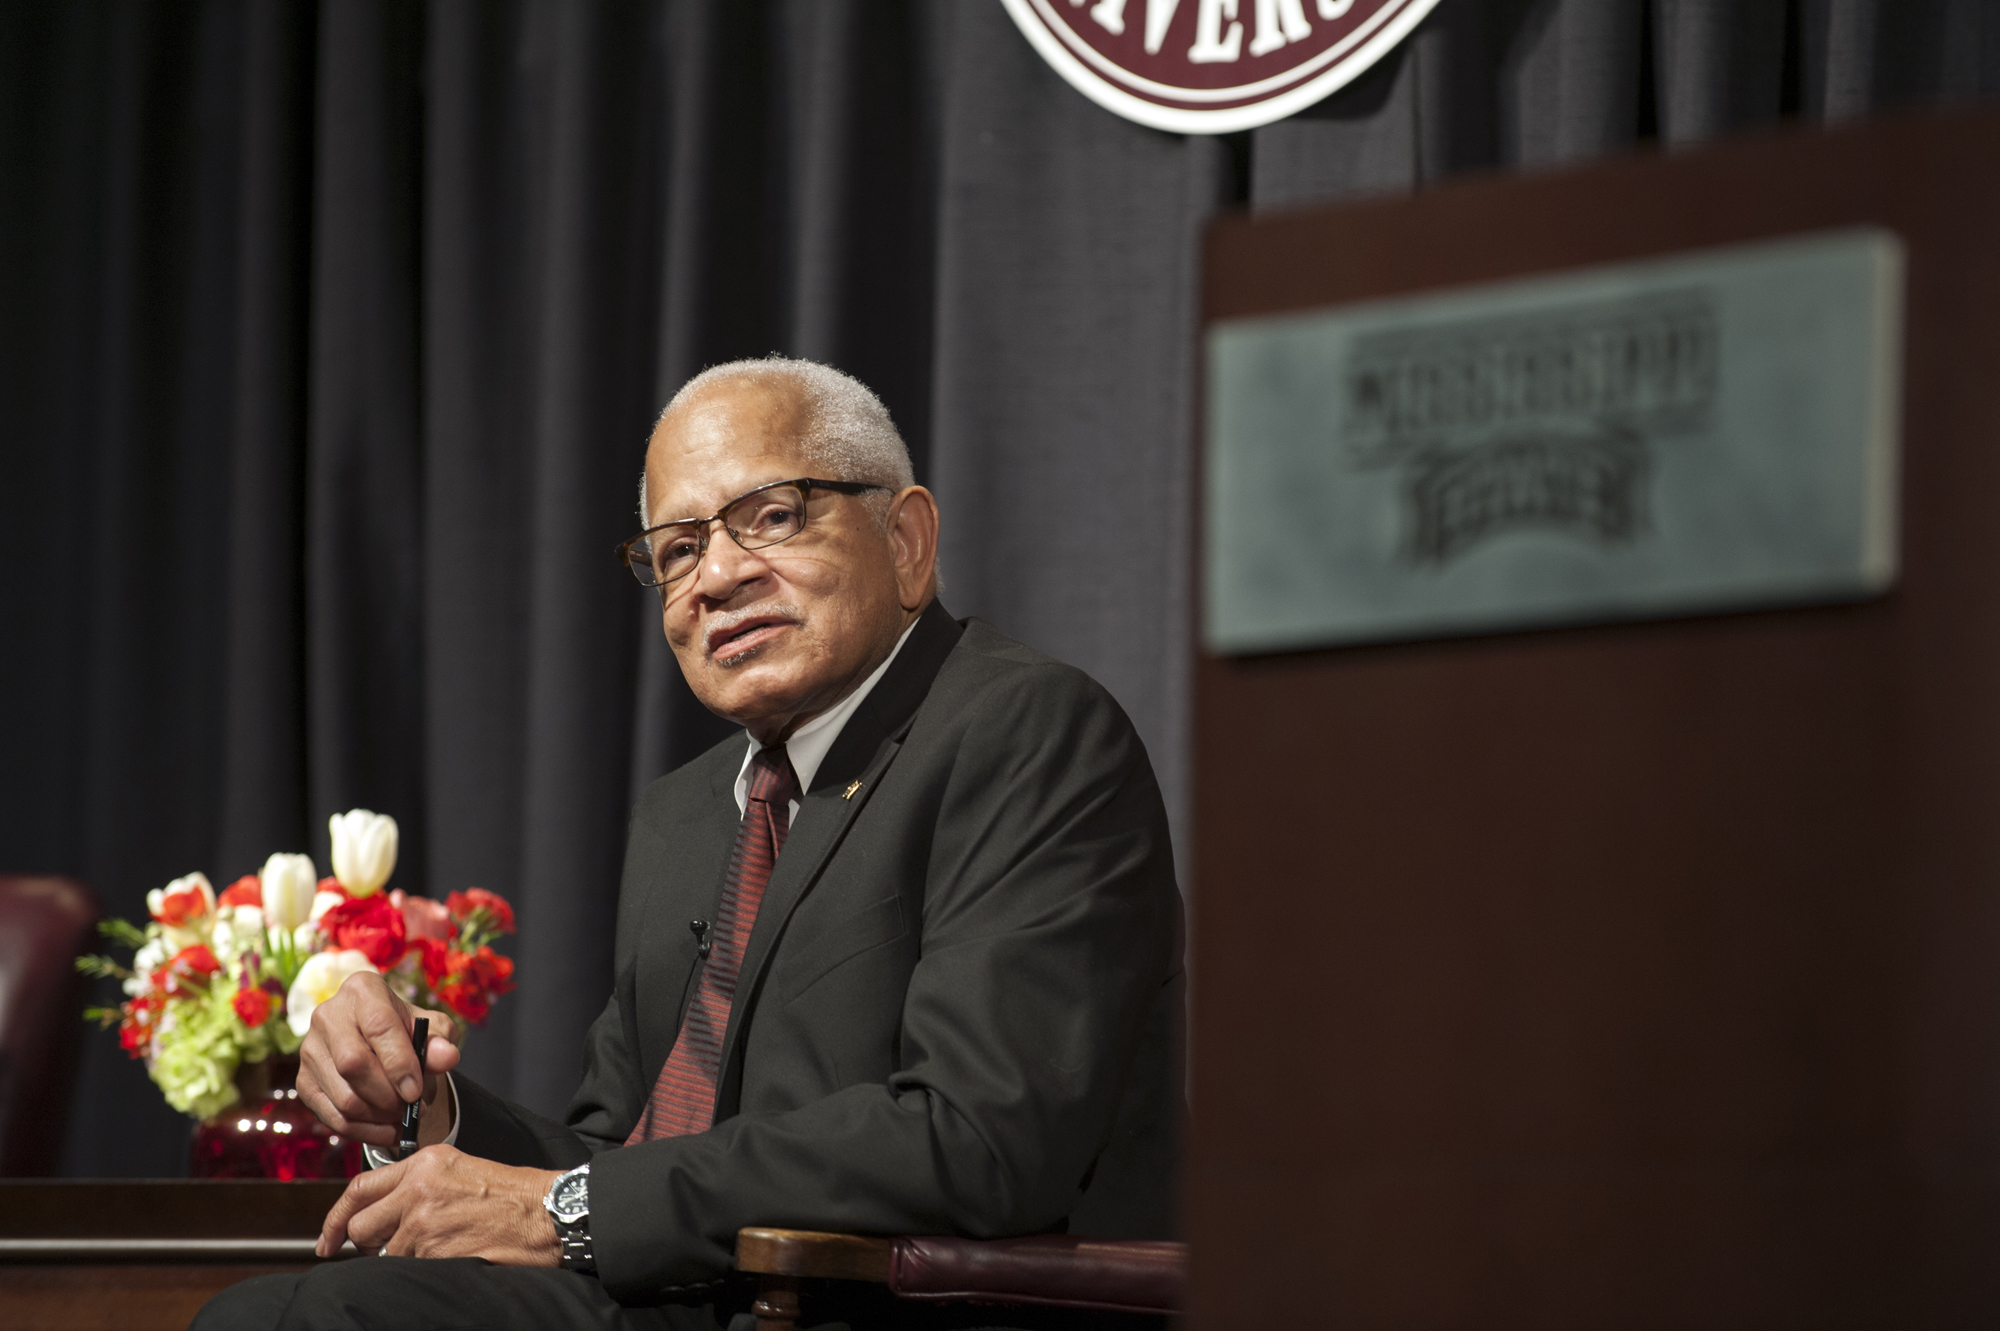 Dr. Richard E. Holmes became the first African American student admitted to Mississippi State University in 1965. Reared in Starkville, the retired physician is a longtime Columbus resident.